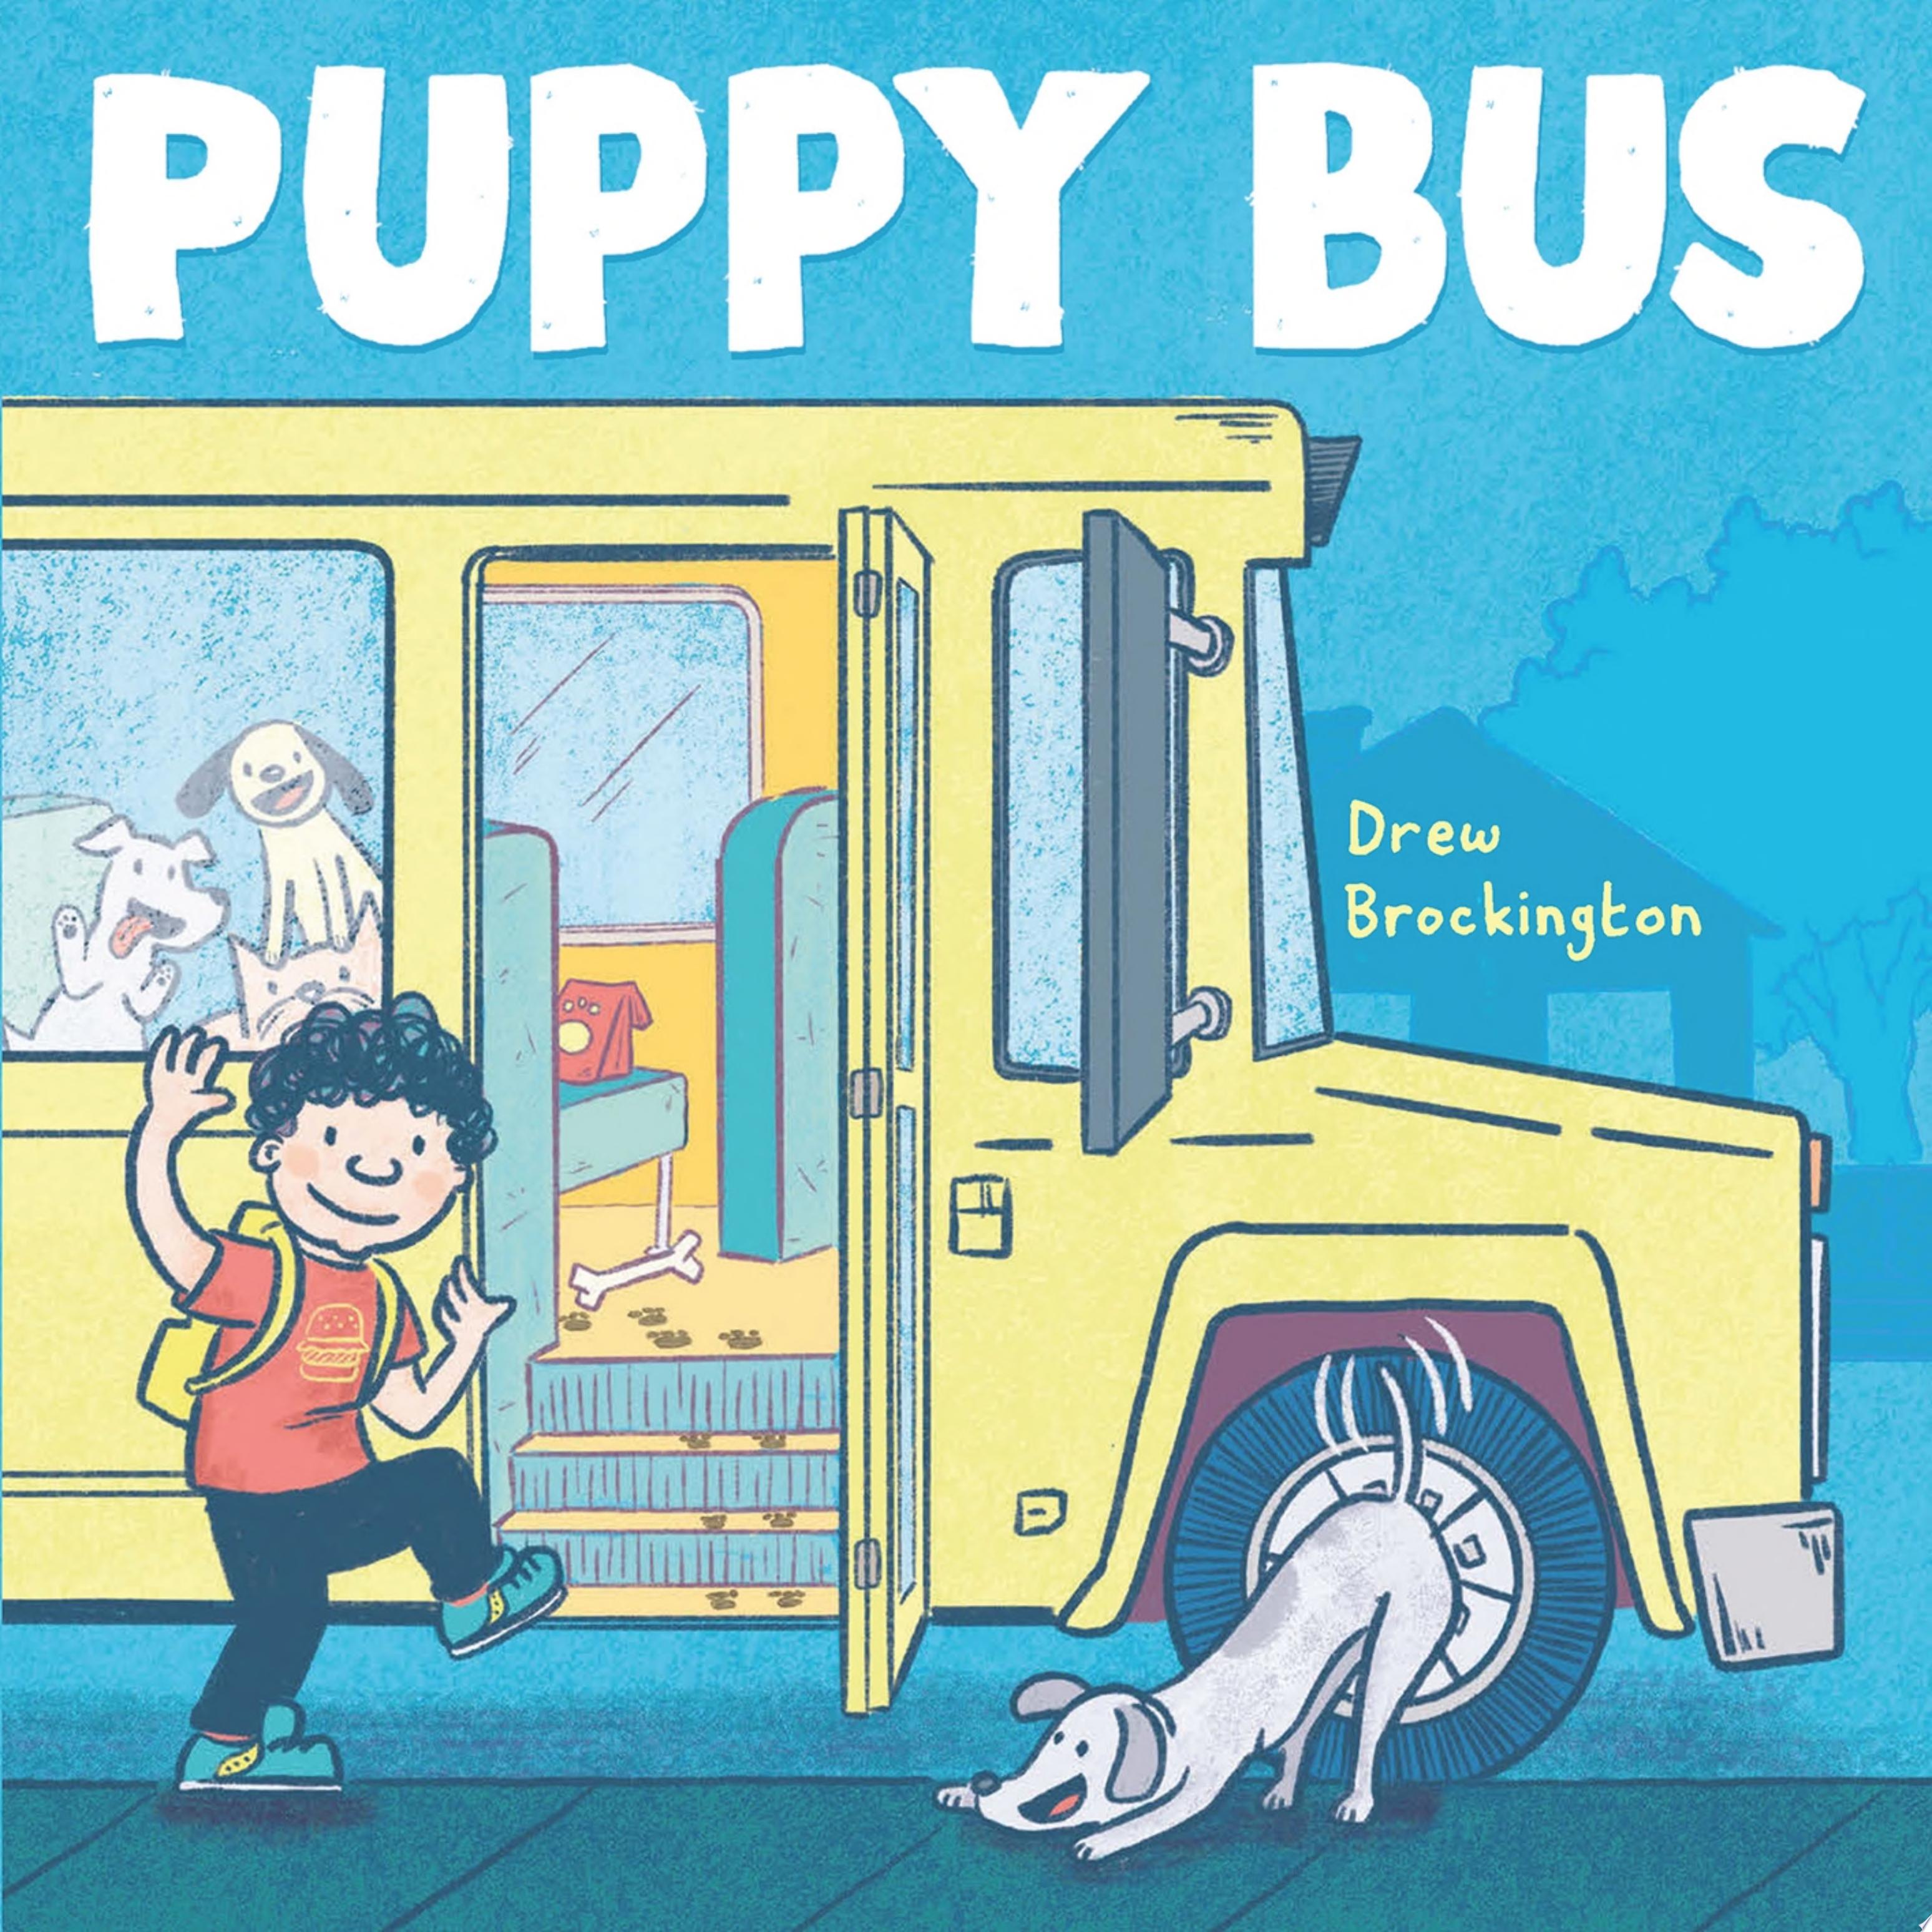 Image for "Puppy Bus"